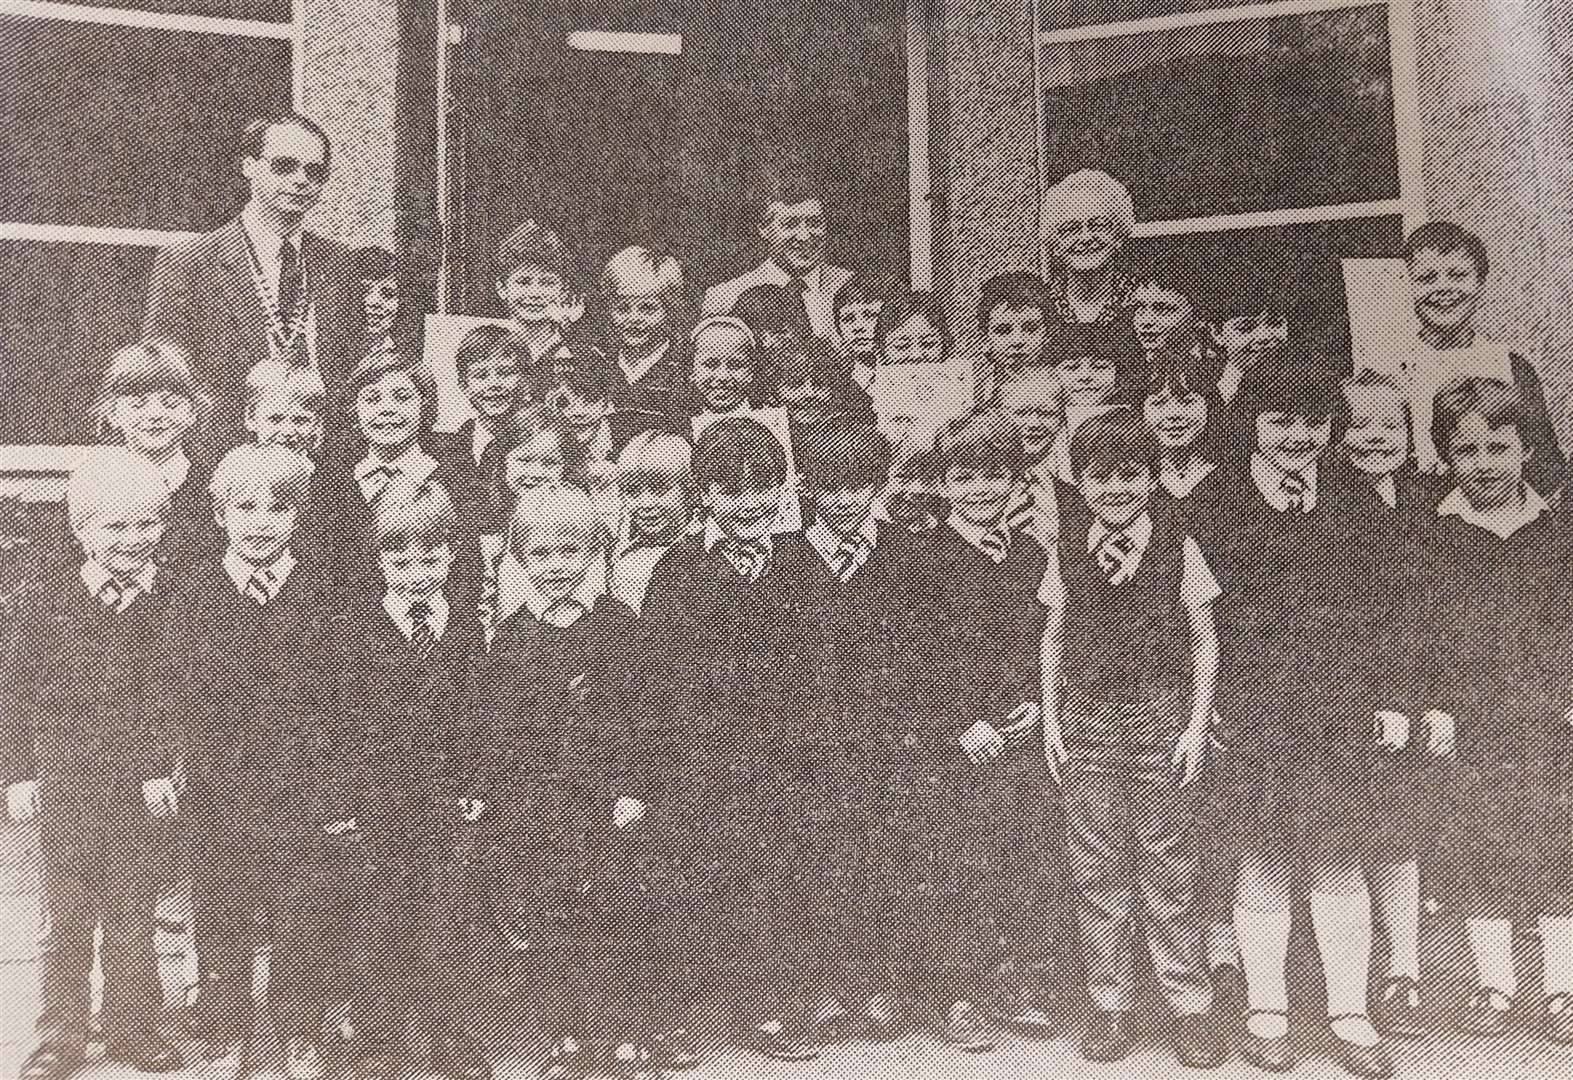 Auchterless Primary School were winners of Turriff And District Round Table's sunflower growing competition (Turriff Advertiser 1985)